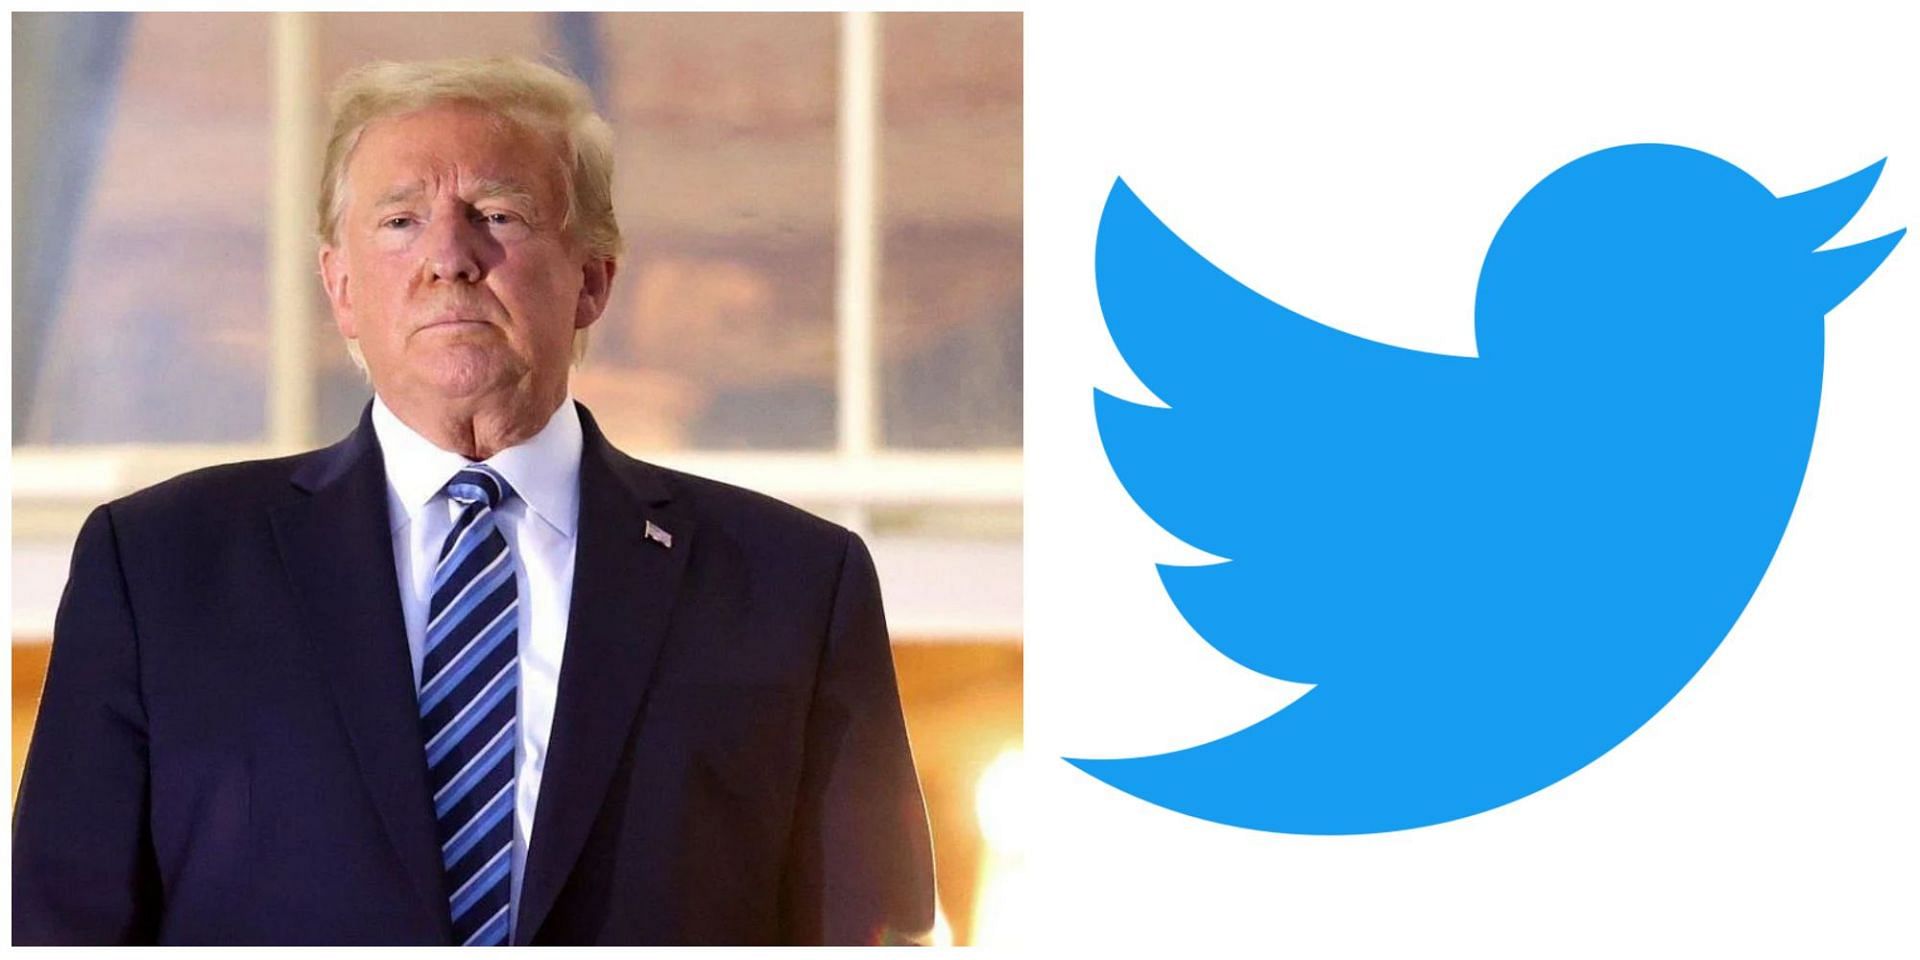 Will Donald Trump make his grand comeback on Twitter? Details explored as Elon Musk reinstated the former President